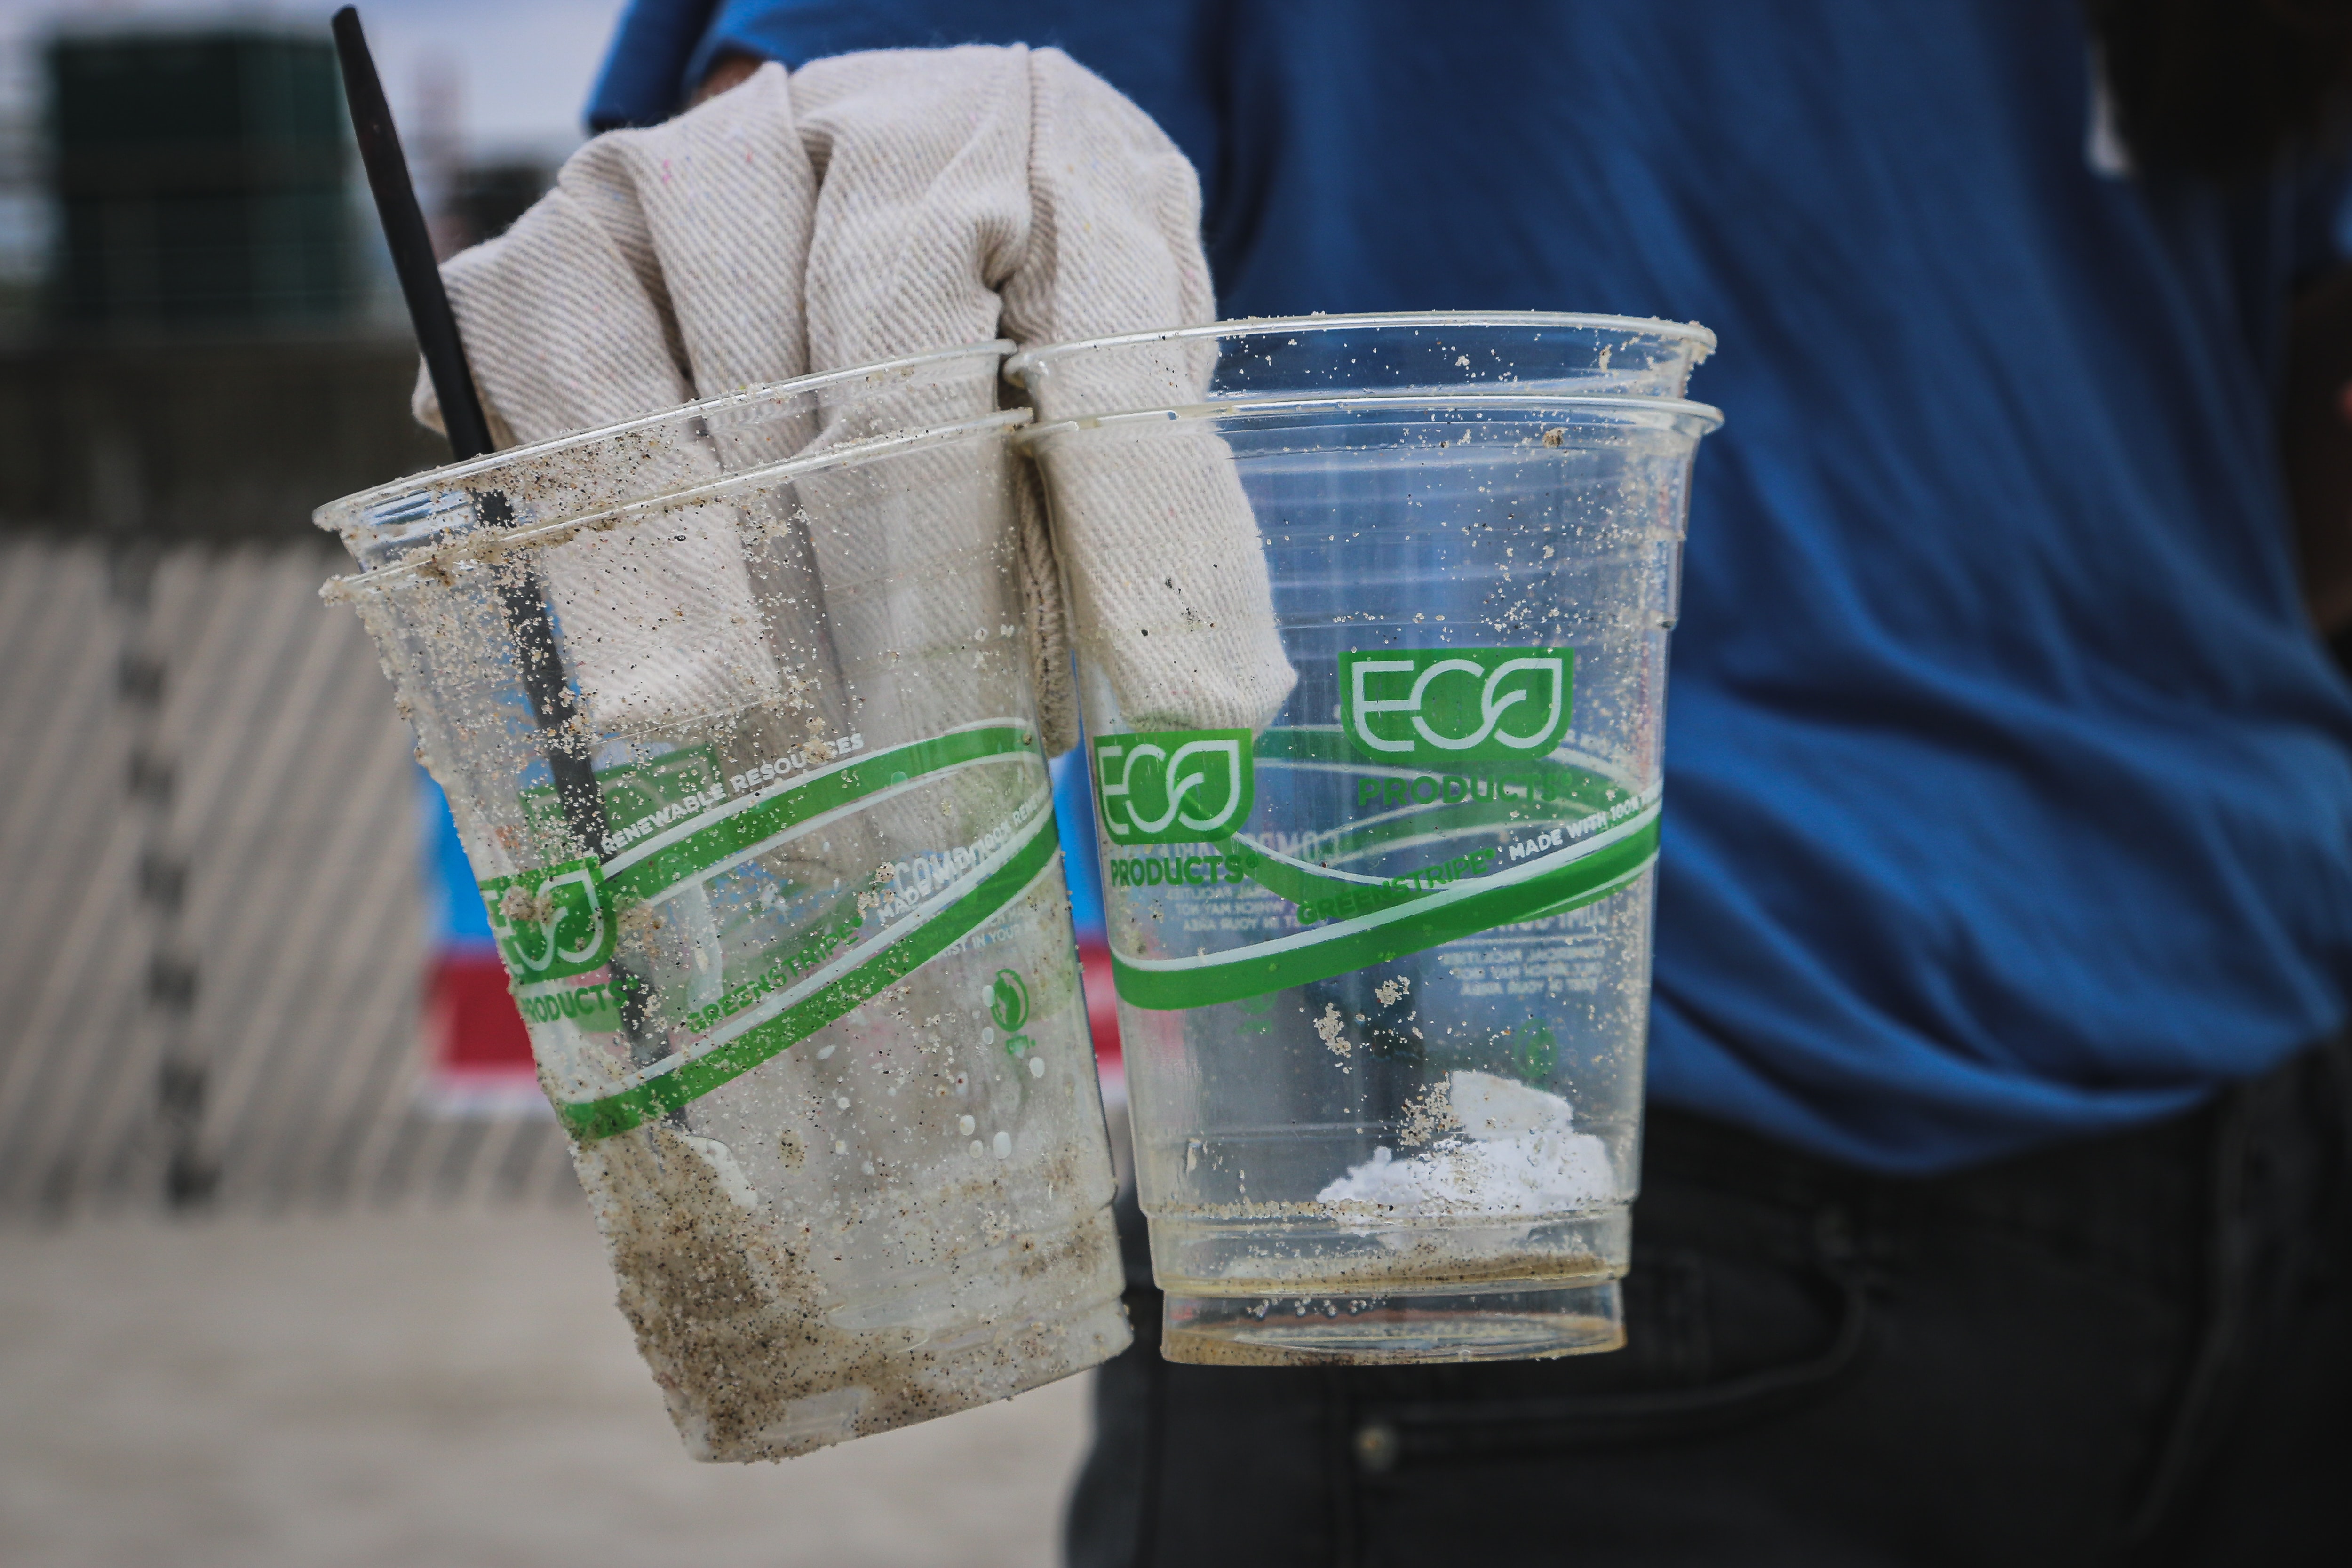 Two clear plastic cups about to be recycled being held